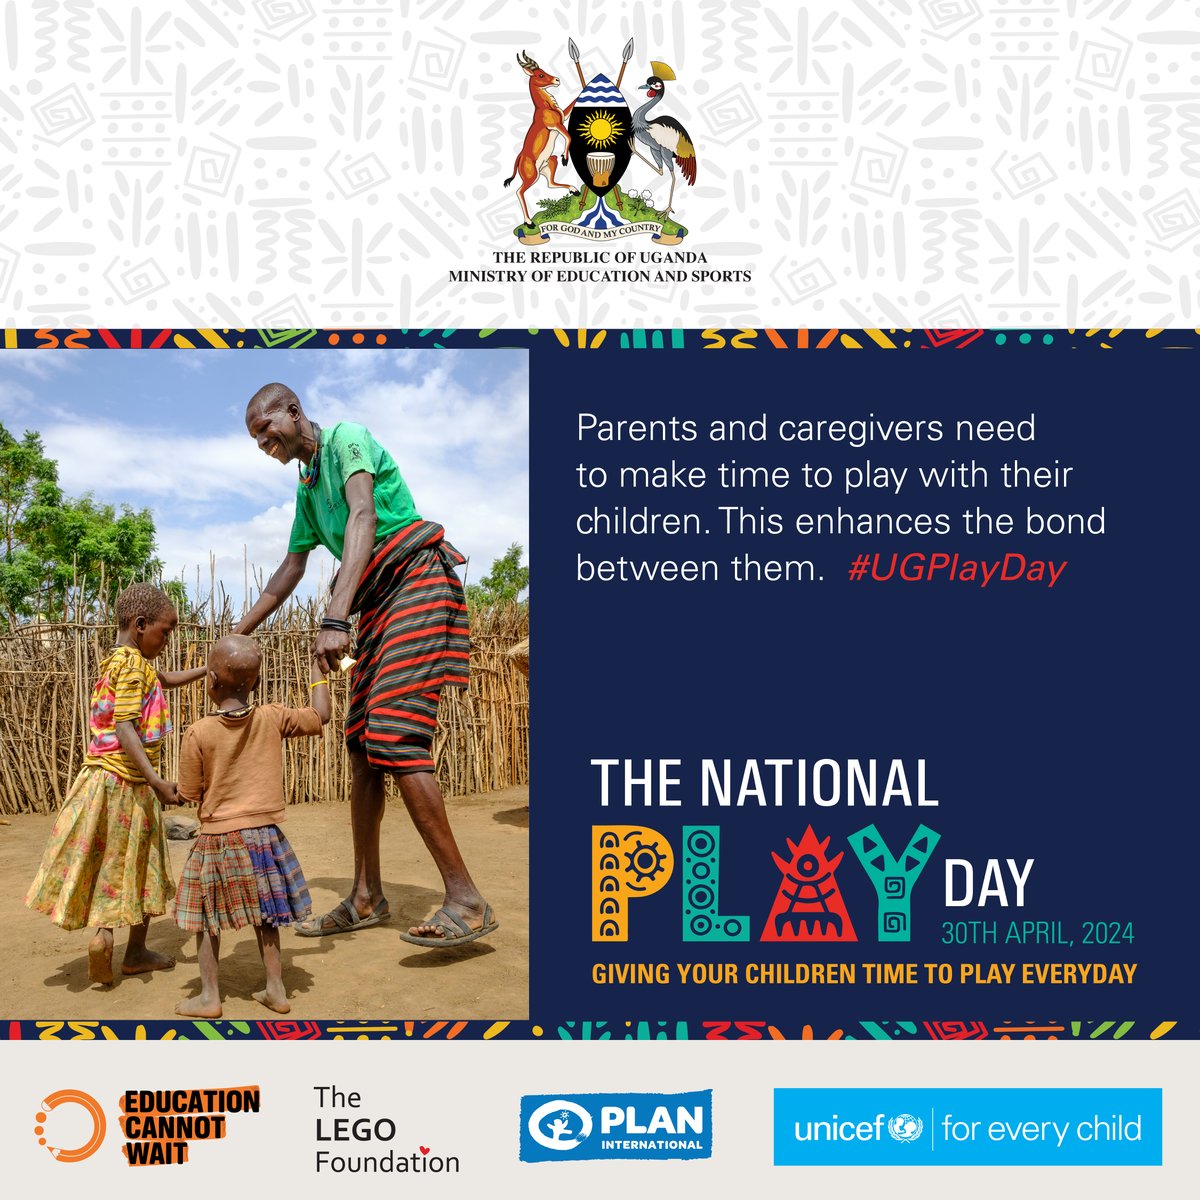 On April3️⃣0️⃣, @EduCannotWait will join @GovUganda & strategic partners in an inaugural commemoration of #UgPlayDay! #UgPlayDay will showcase the best practices of play-based early childhood development programs and pre-primary education services. @UNICEFUganda @PlanUganda